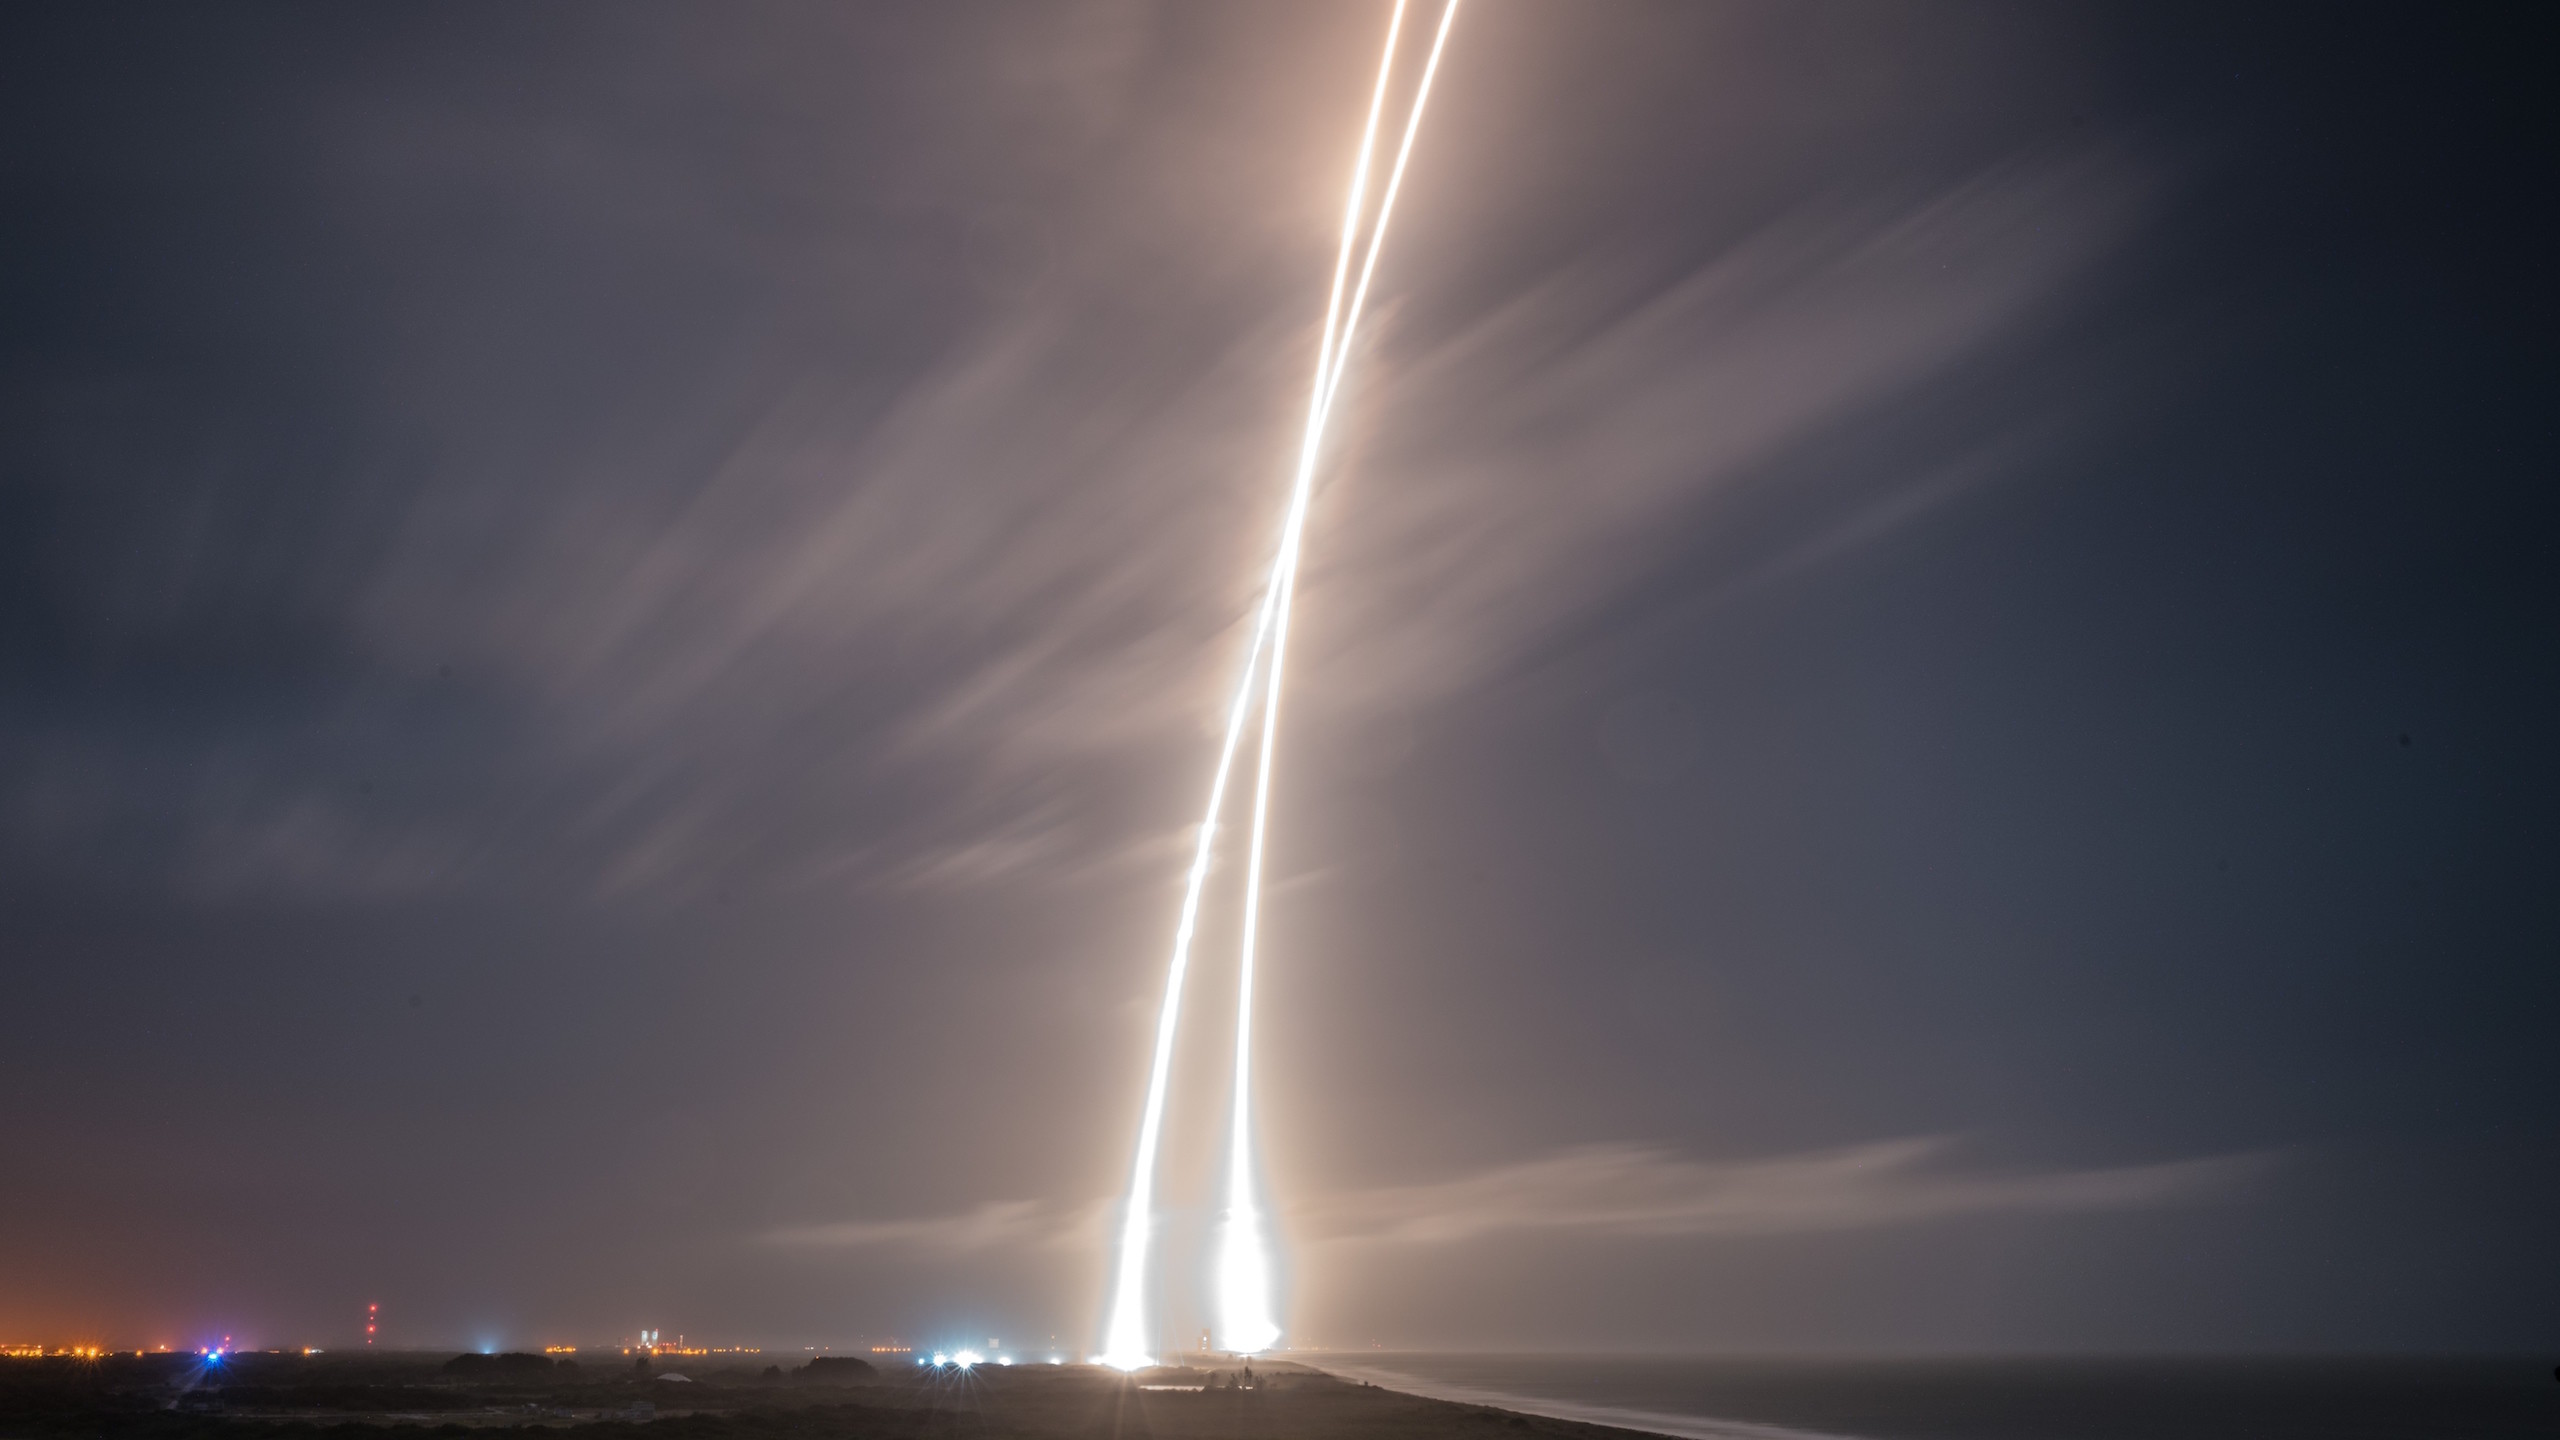 SpaceXs launch and landing of Falcon9 rocket 2560×1440 1080p in comments Top reddit wallpapers Pinterest